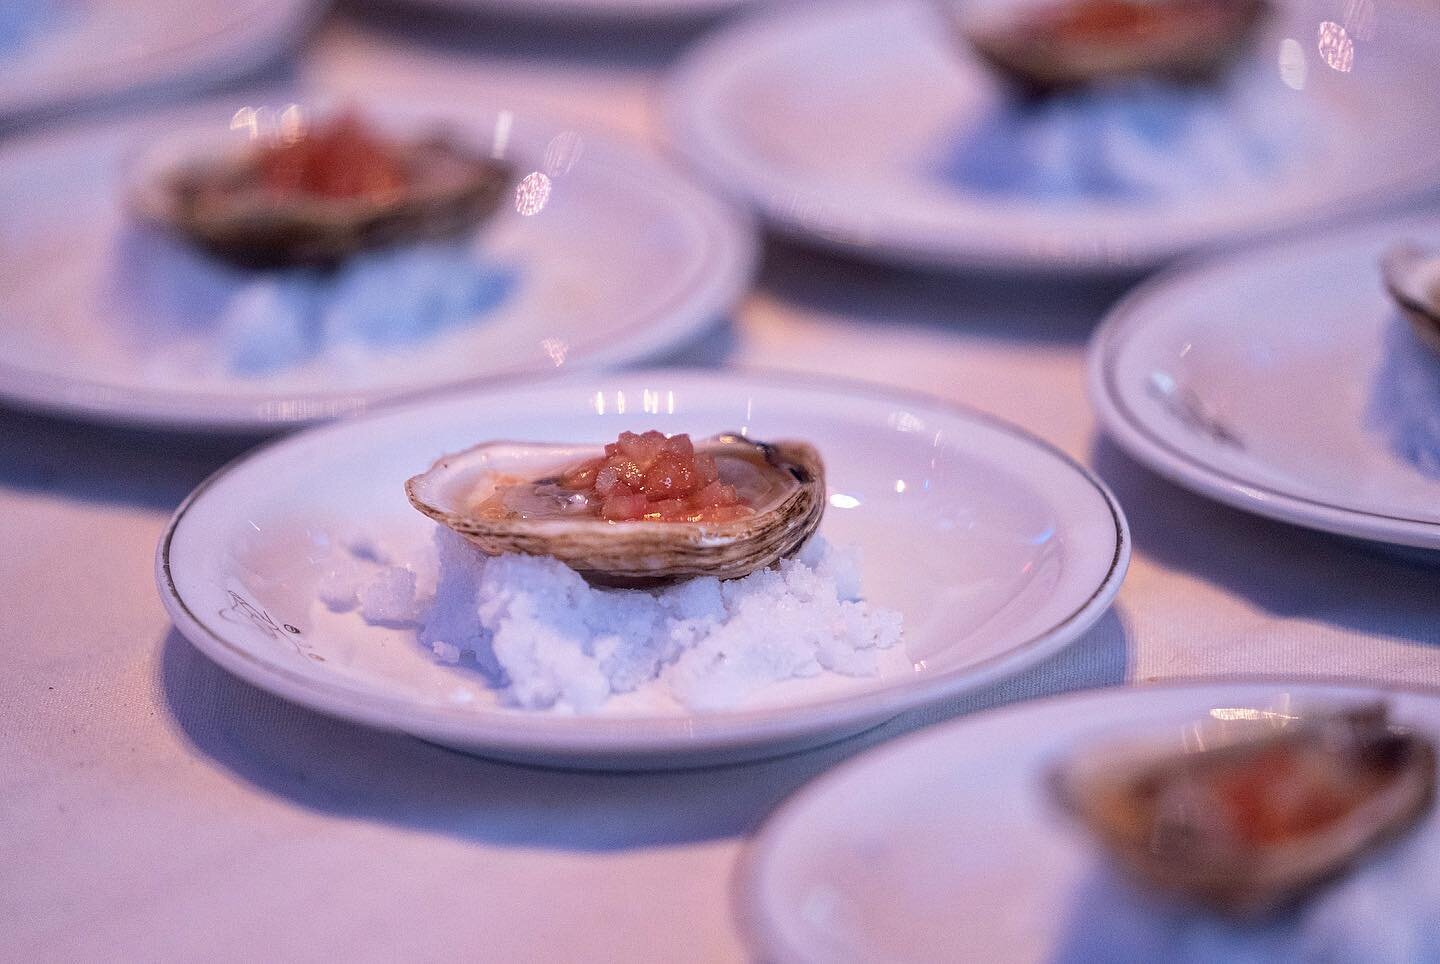 Oysters Tomato Kimchi Mignonette at Celebrity Chef Gala by @autismspeaks ❤️

#oysters #gala #newyork #chef #dinner #autismspeaks #chefs4autism